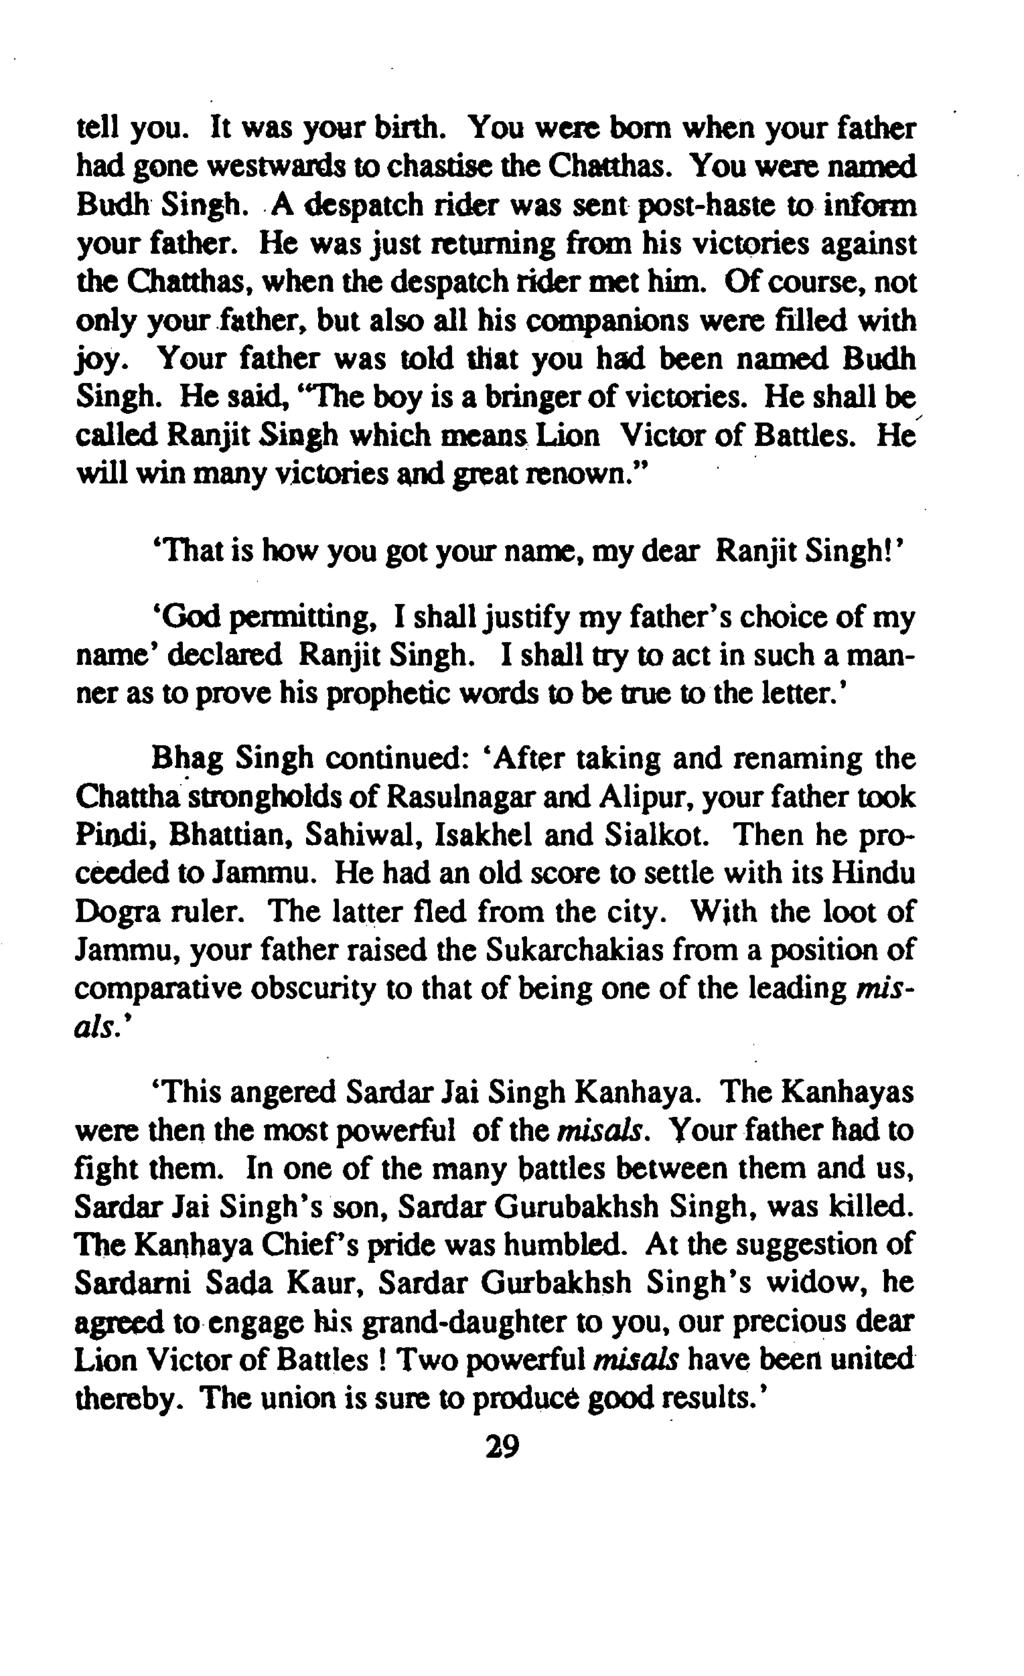 tell you. It was your birth. You were born when your father had gone westwards to chastise the Chatthas. You were named Budh Singh..A despatch rider was sent post-haste to inform your father.